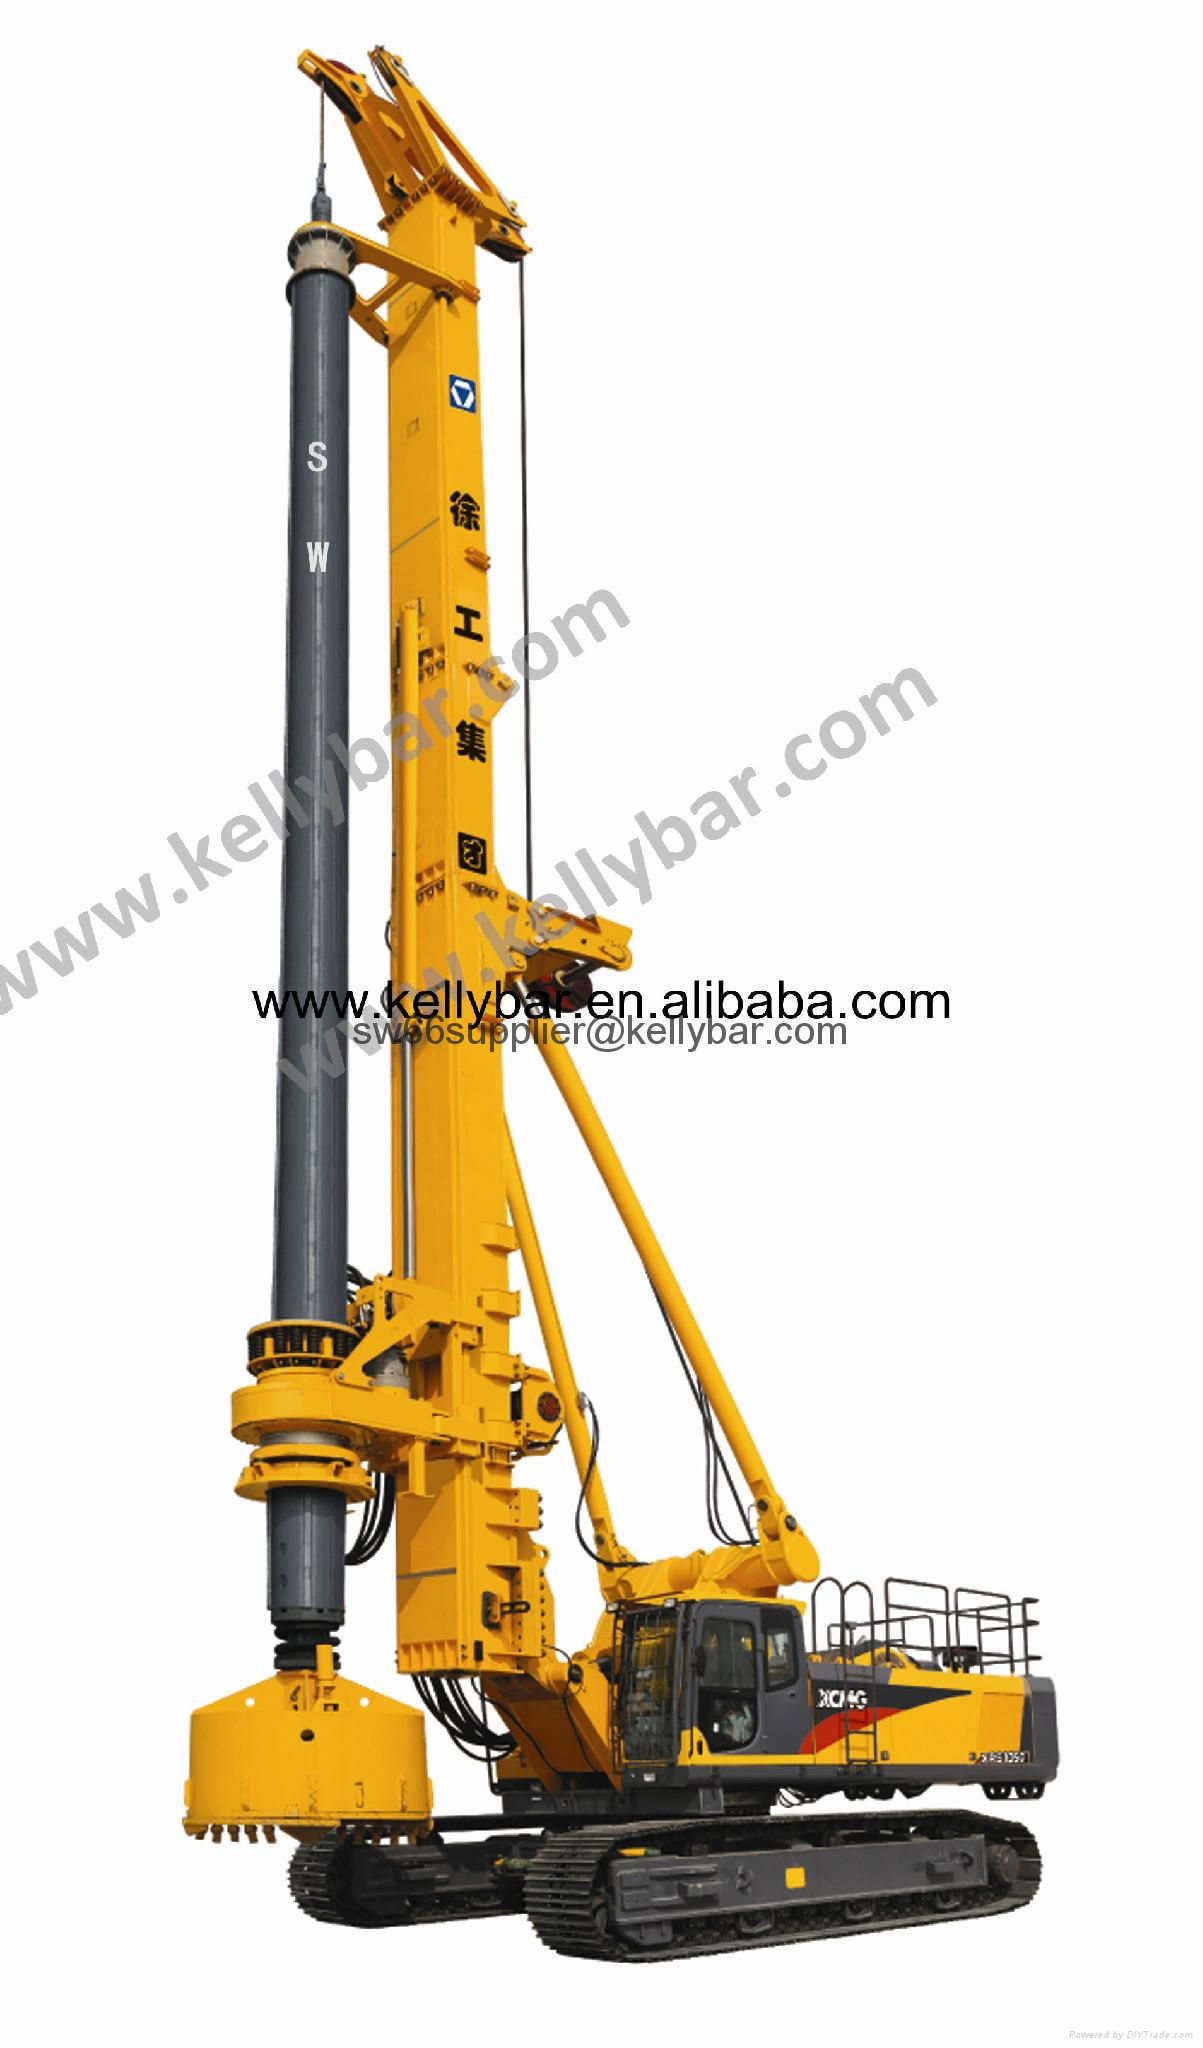 XCMG XRS1050 bore hole drilling rig